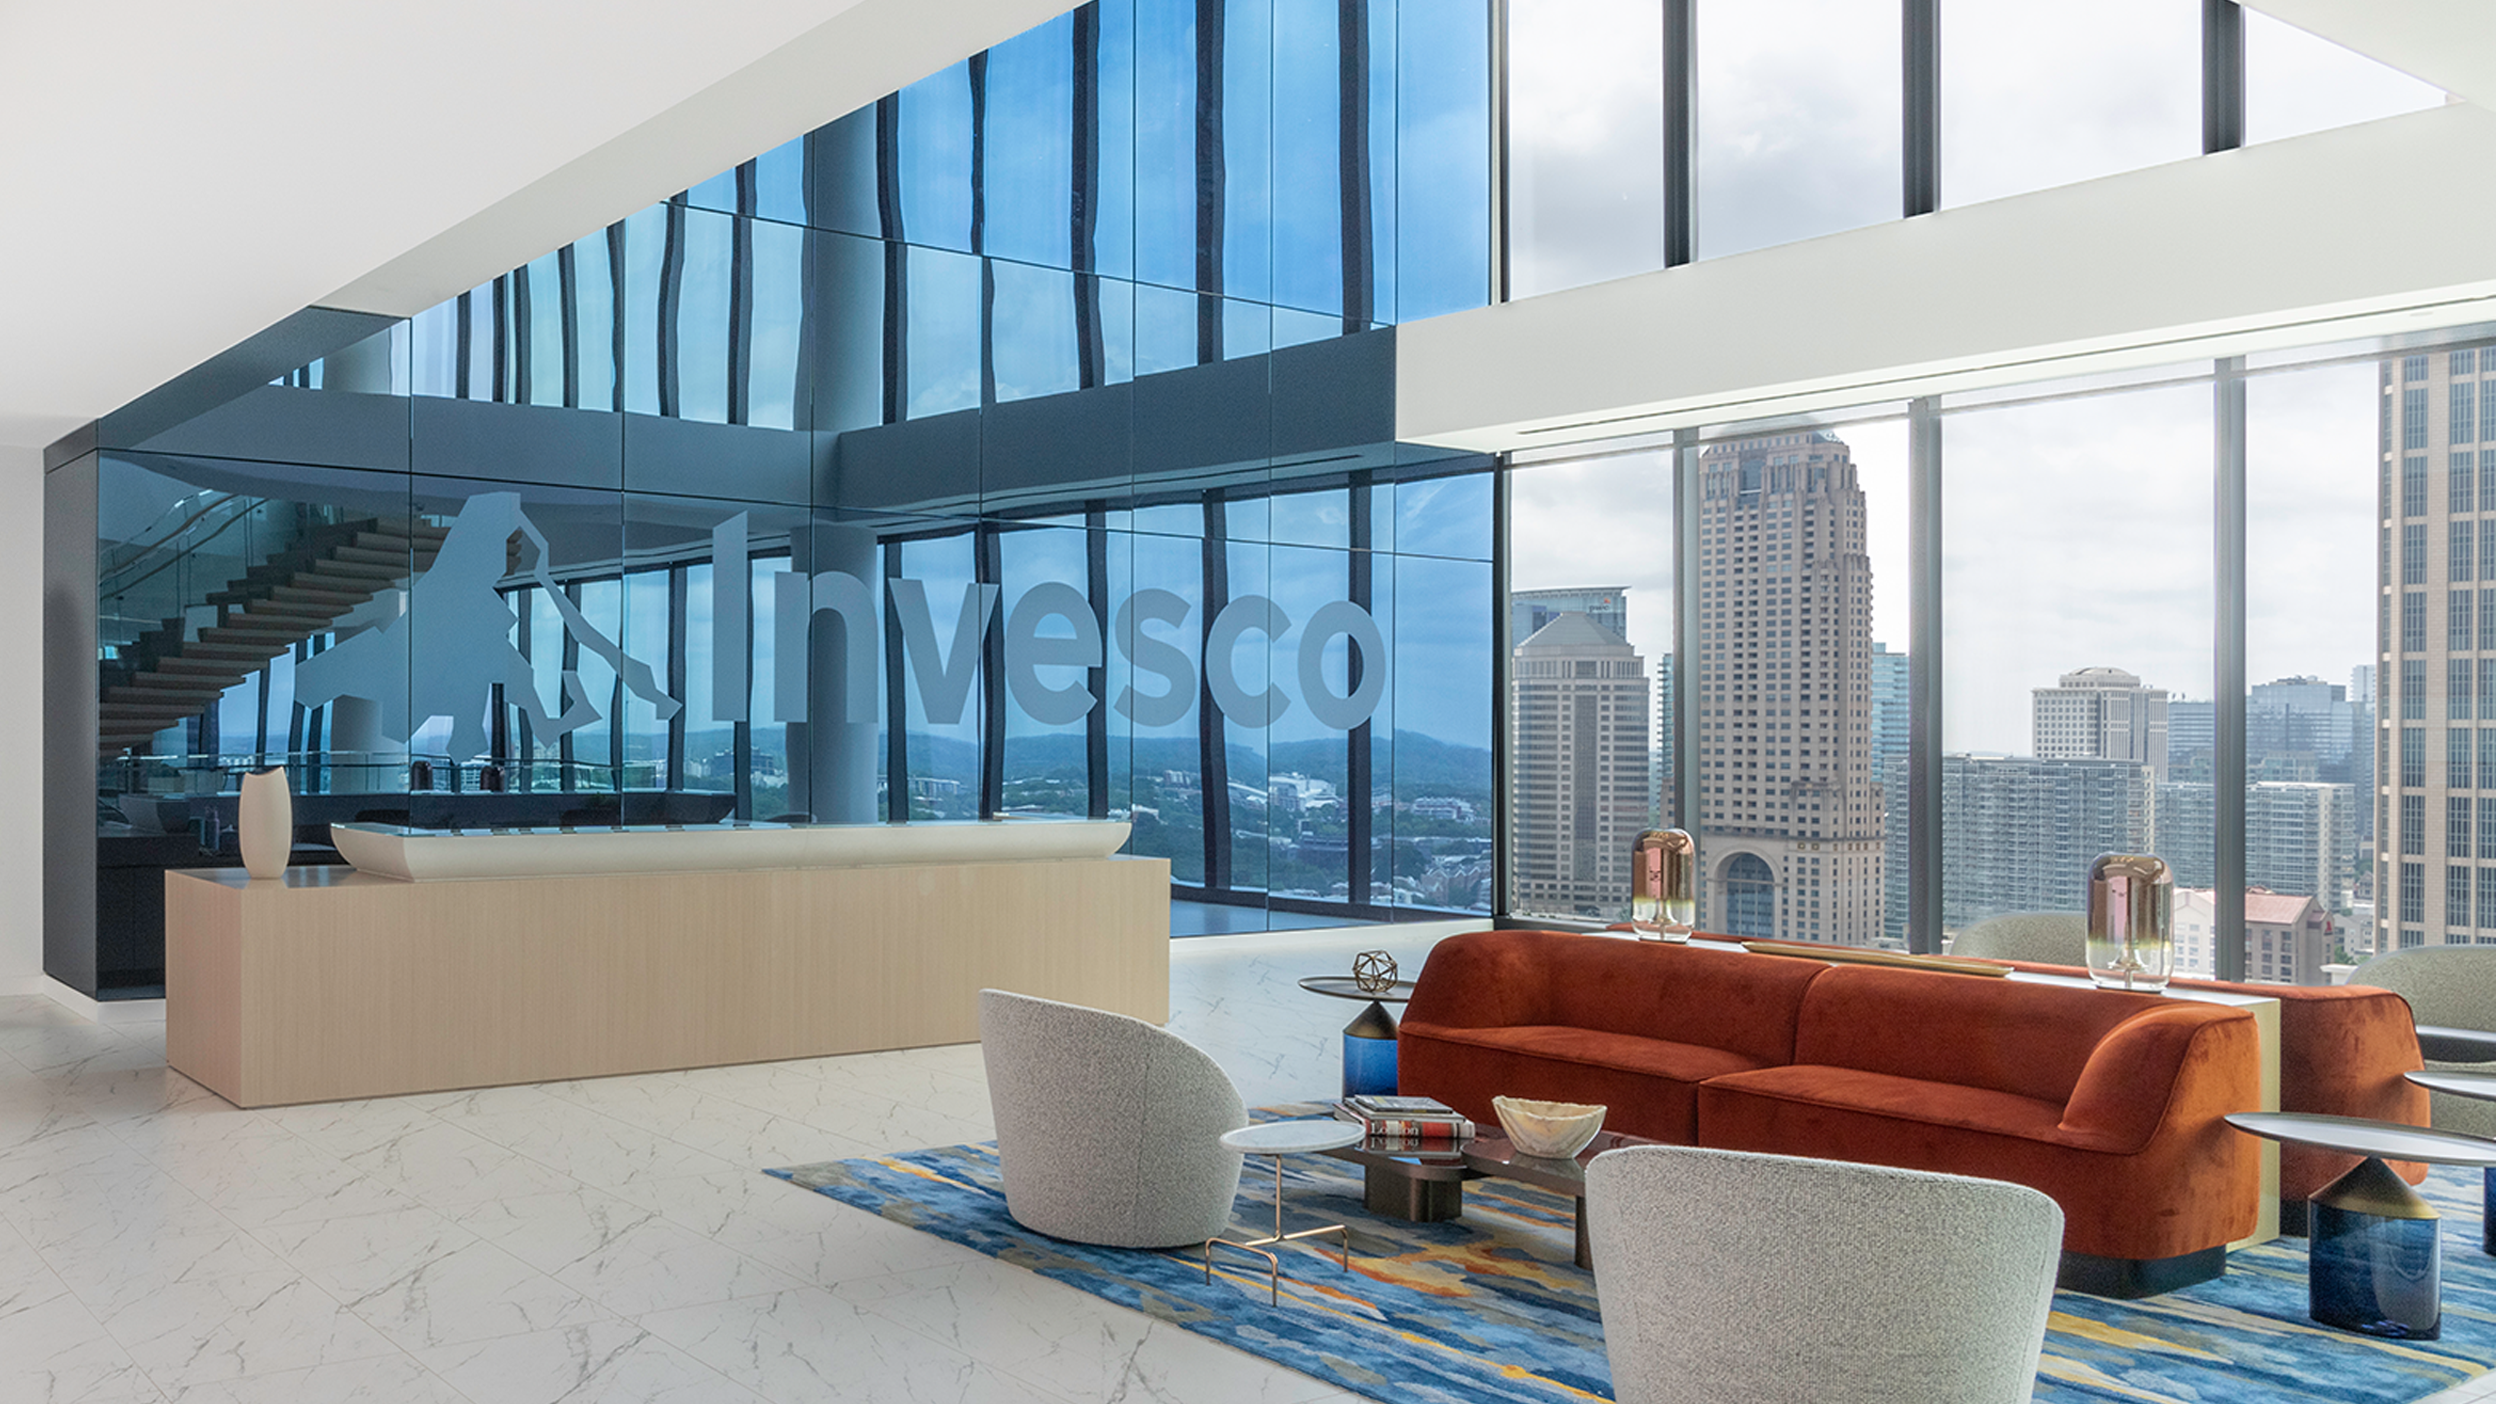 View of Invesco Atlanta office highlighting the city view. Invesco is dedicated to creating greater investment possibilities.